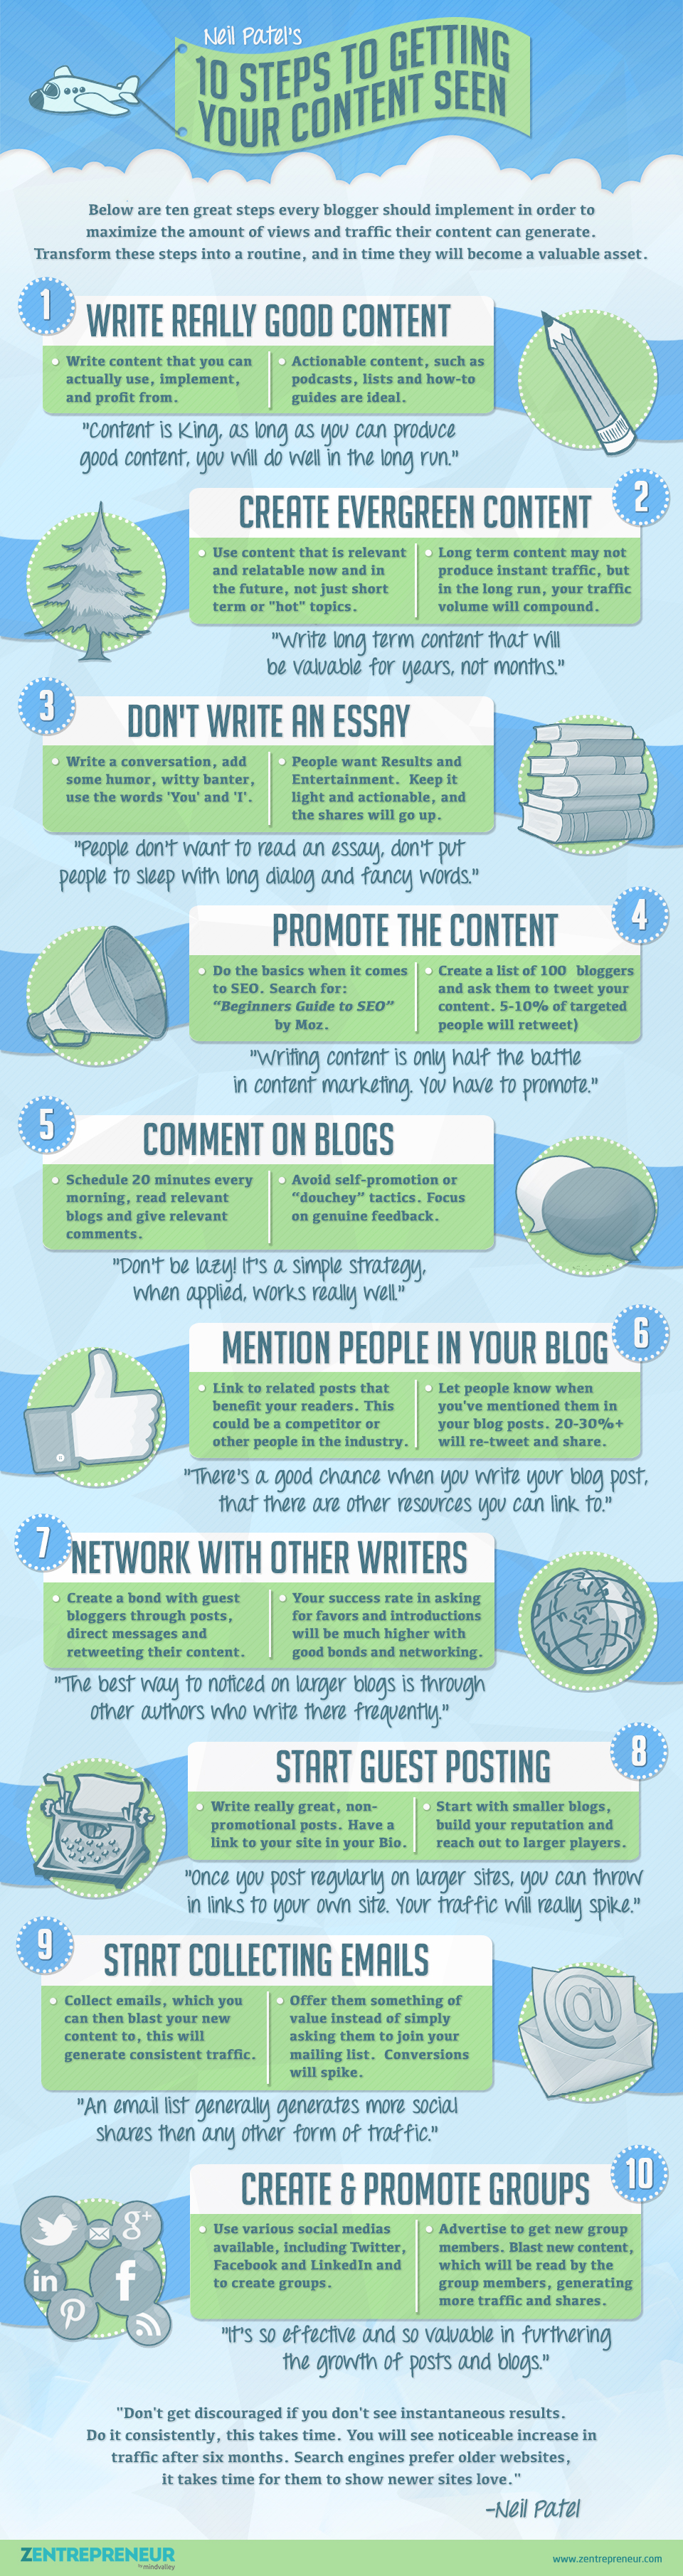 Make Your Content Stand Out Infographic